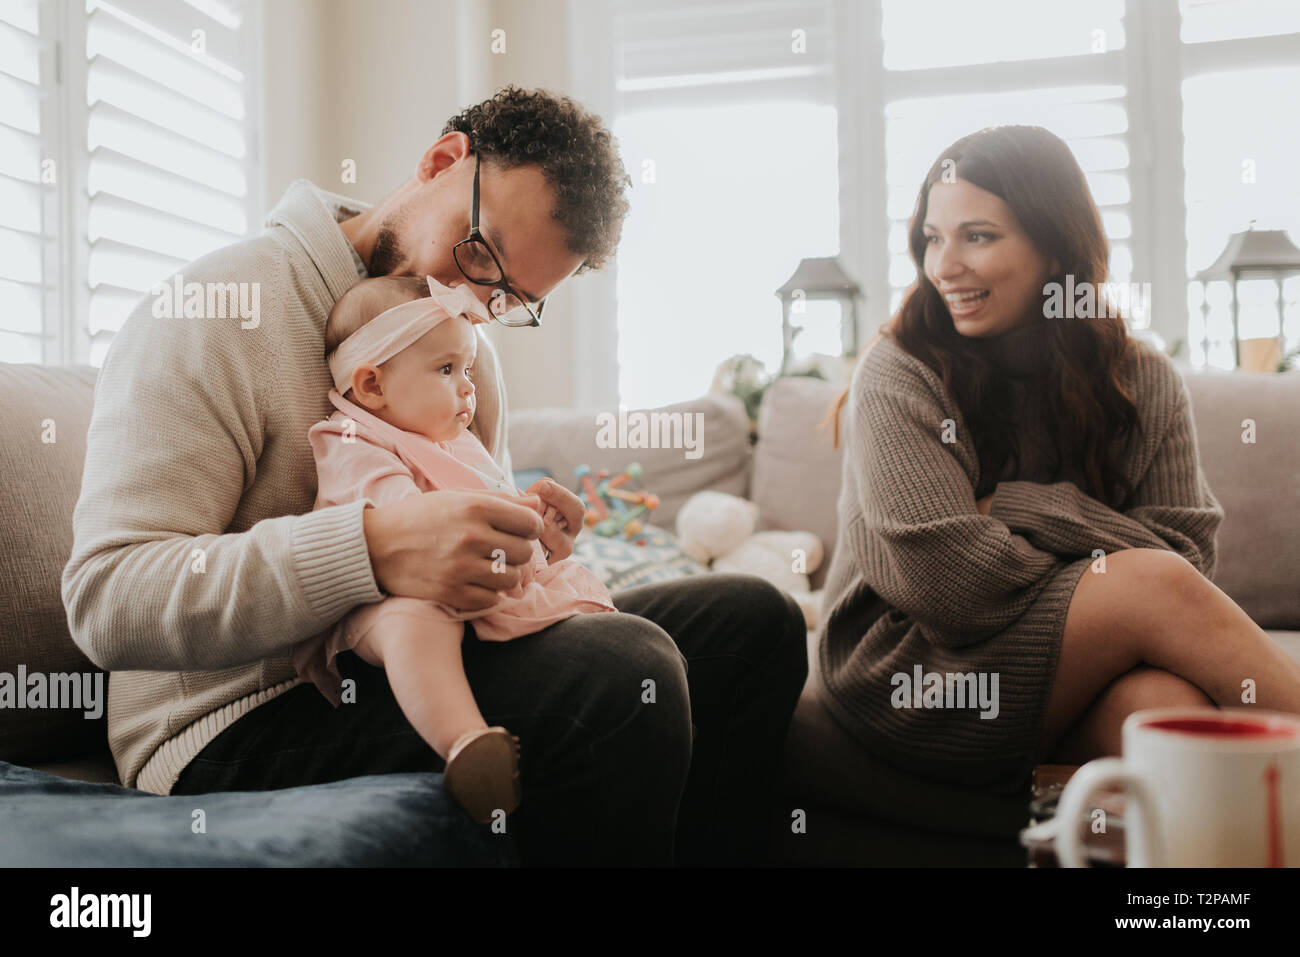 Couple playing with baby daughter on sofa Stock Photo